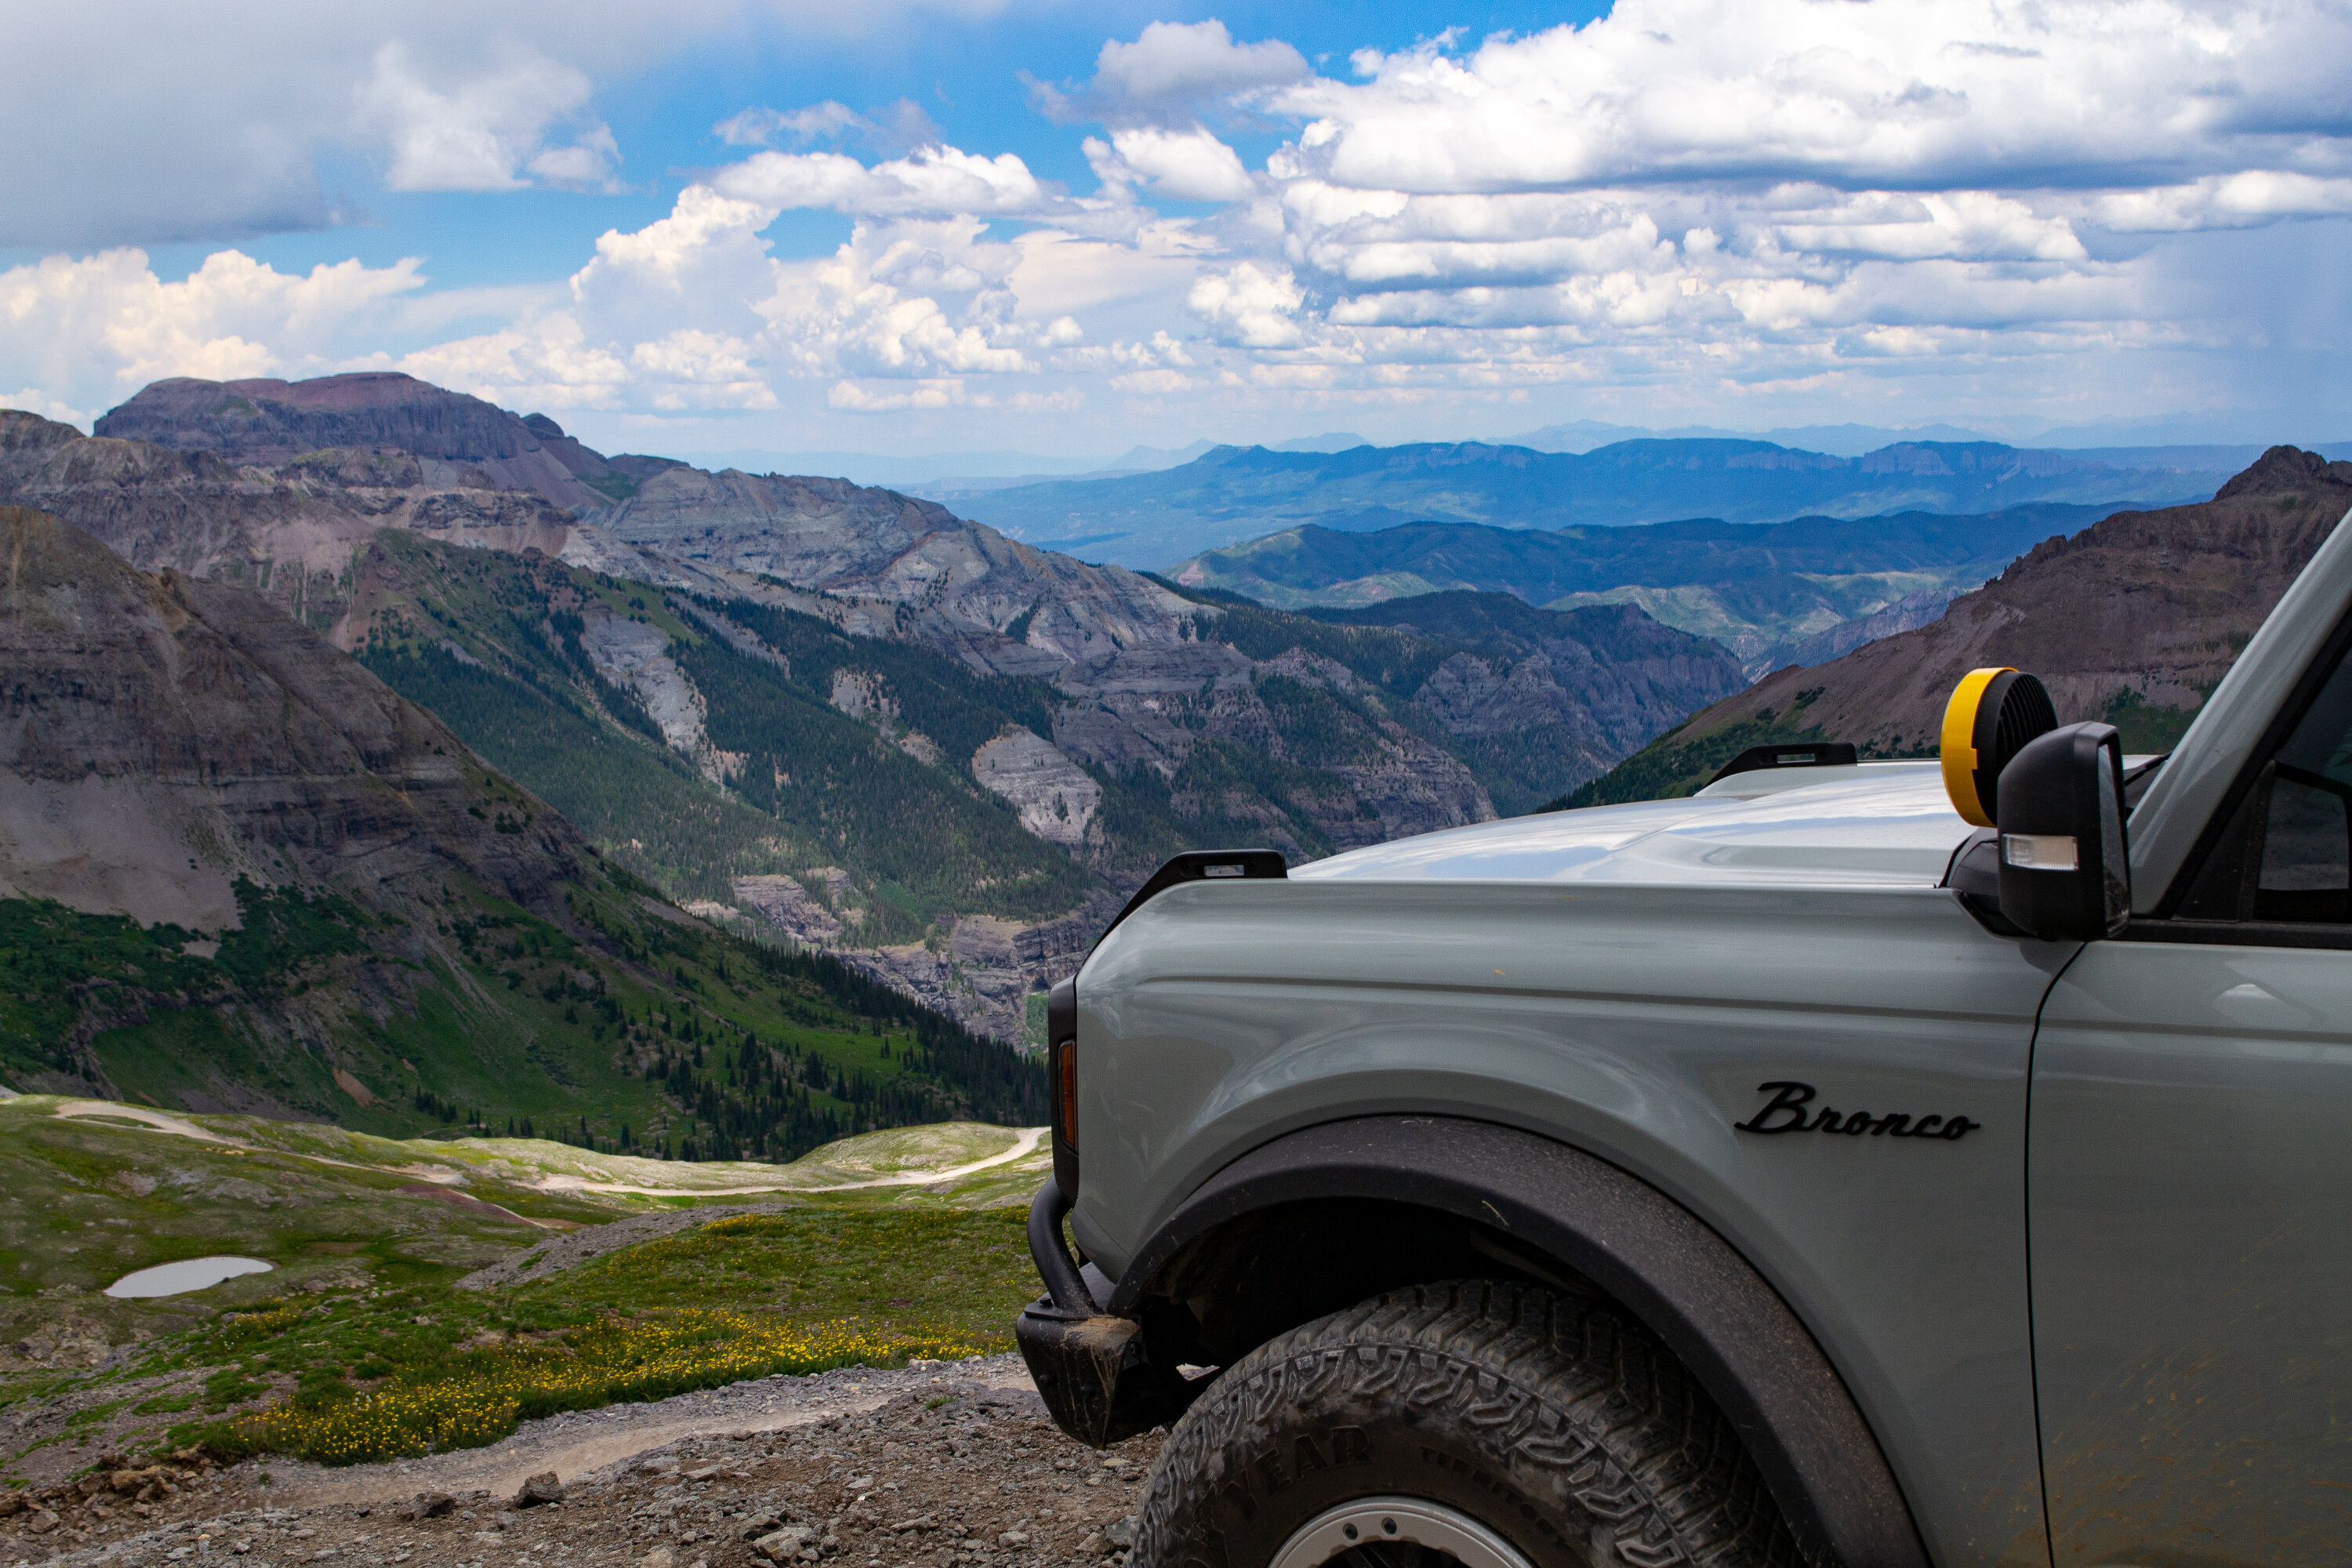 Ford Bronco Badlands 4door takes on Black Bear Pass, Imogene Pass, and Poughkeepsie Gulch in Colorado. DSC_0179